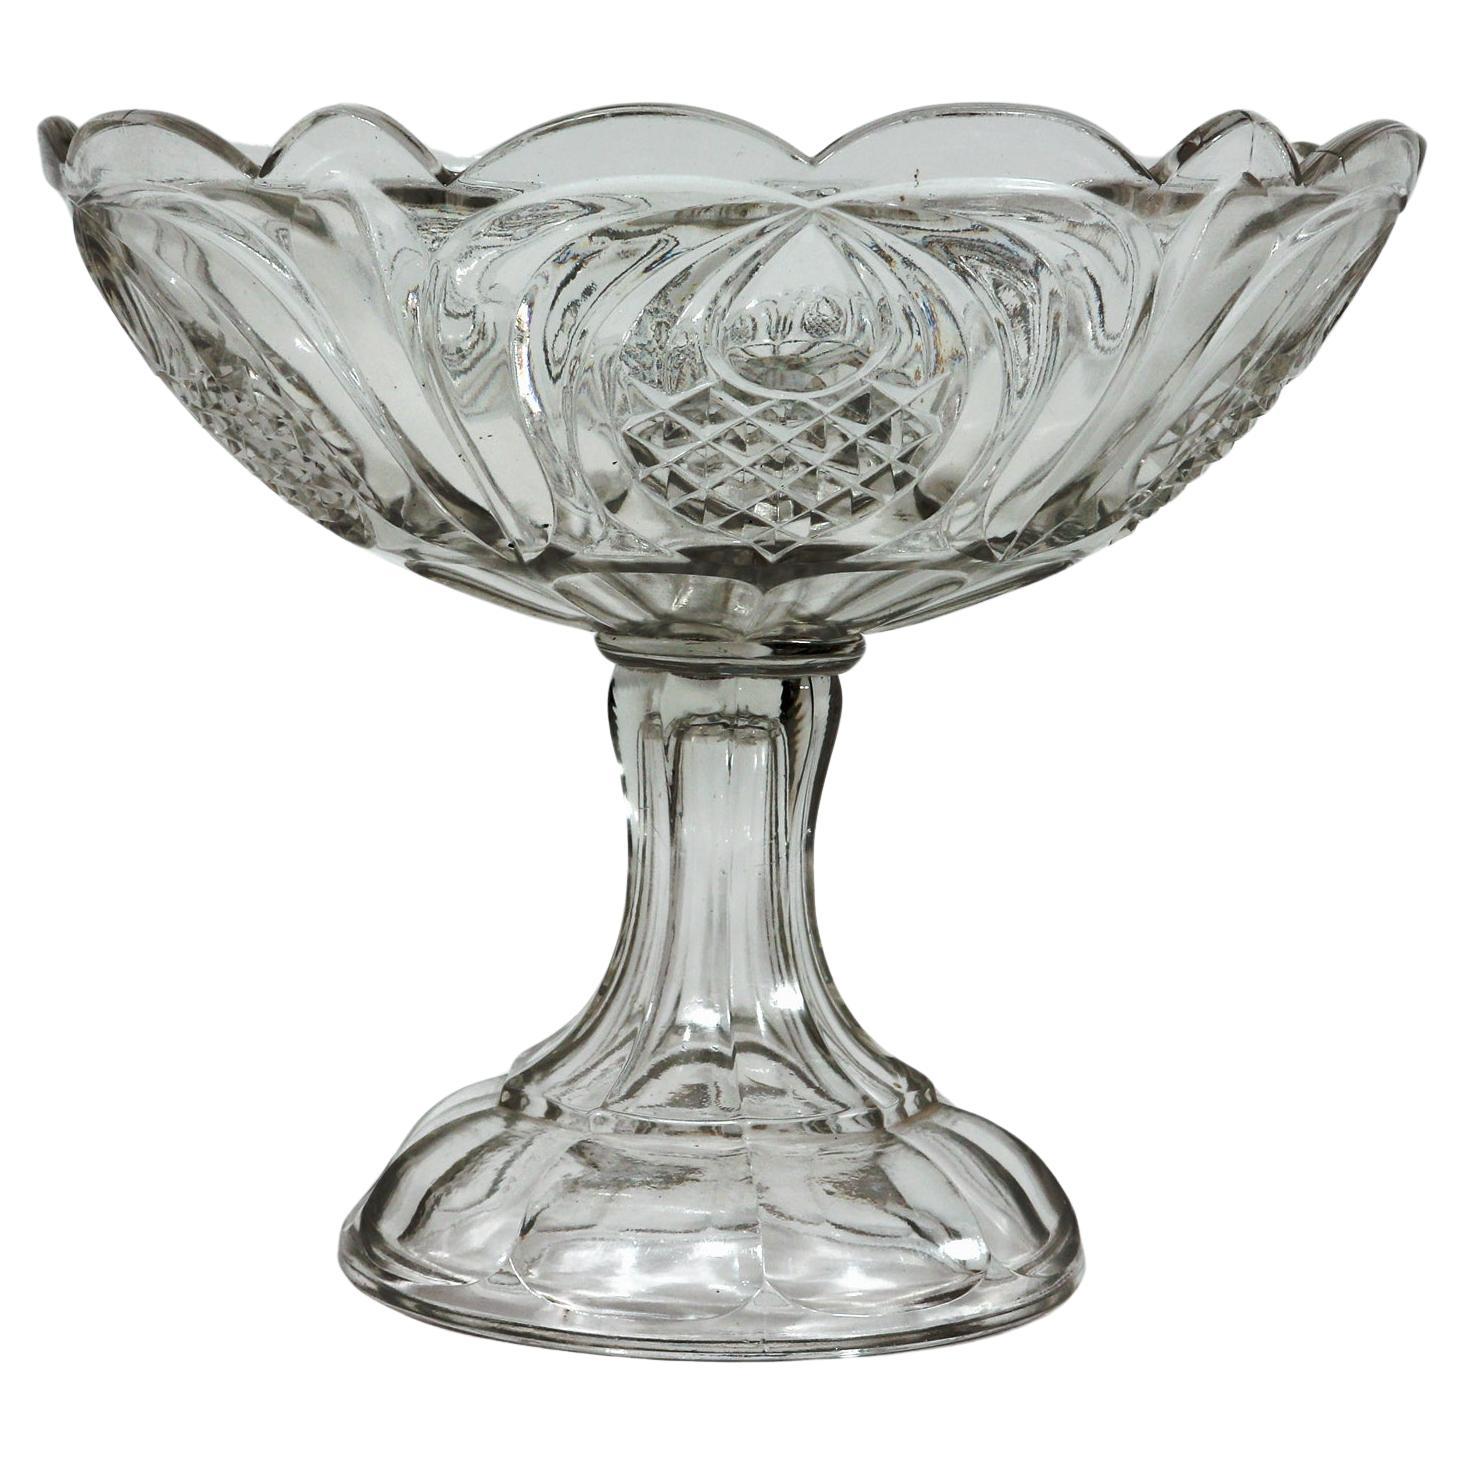 Boston & Sandwich American Pressed Glass Compote with Pineapple Pattern